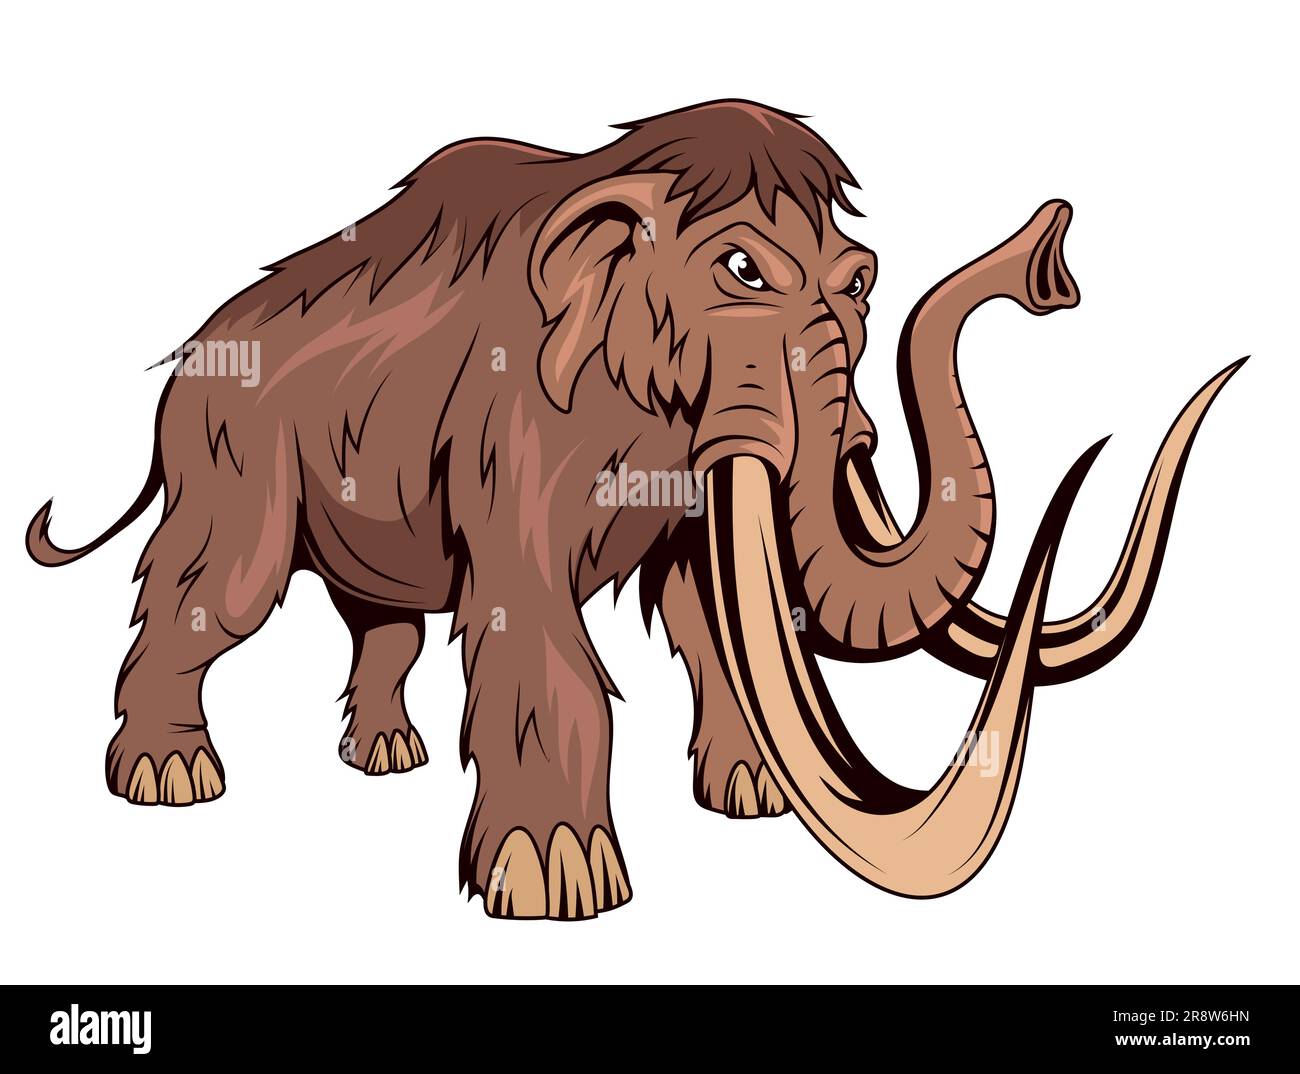 Mammoth. Vector illustration of a elephant with tusks. Animals before our era, paleontology, history, archeology and culture Stock Vector